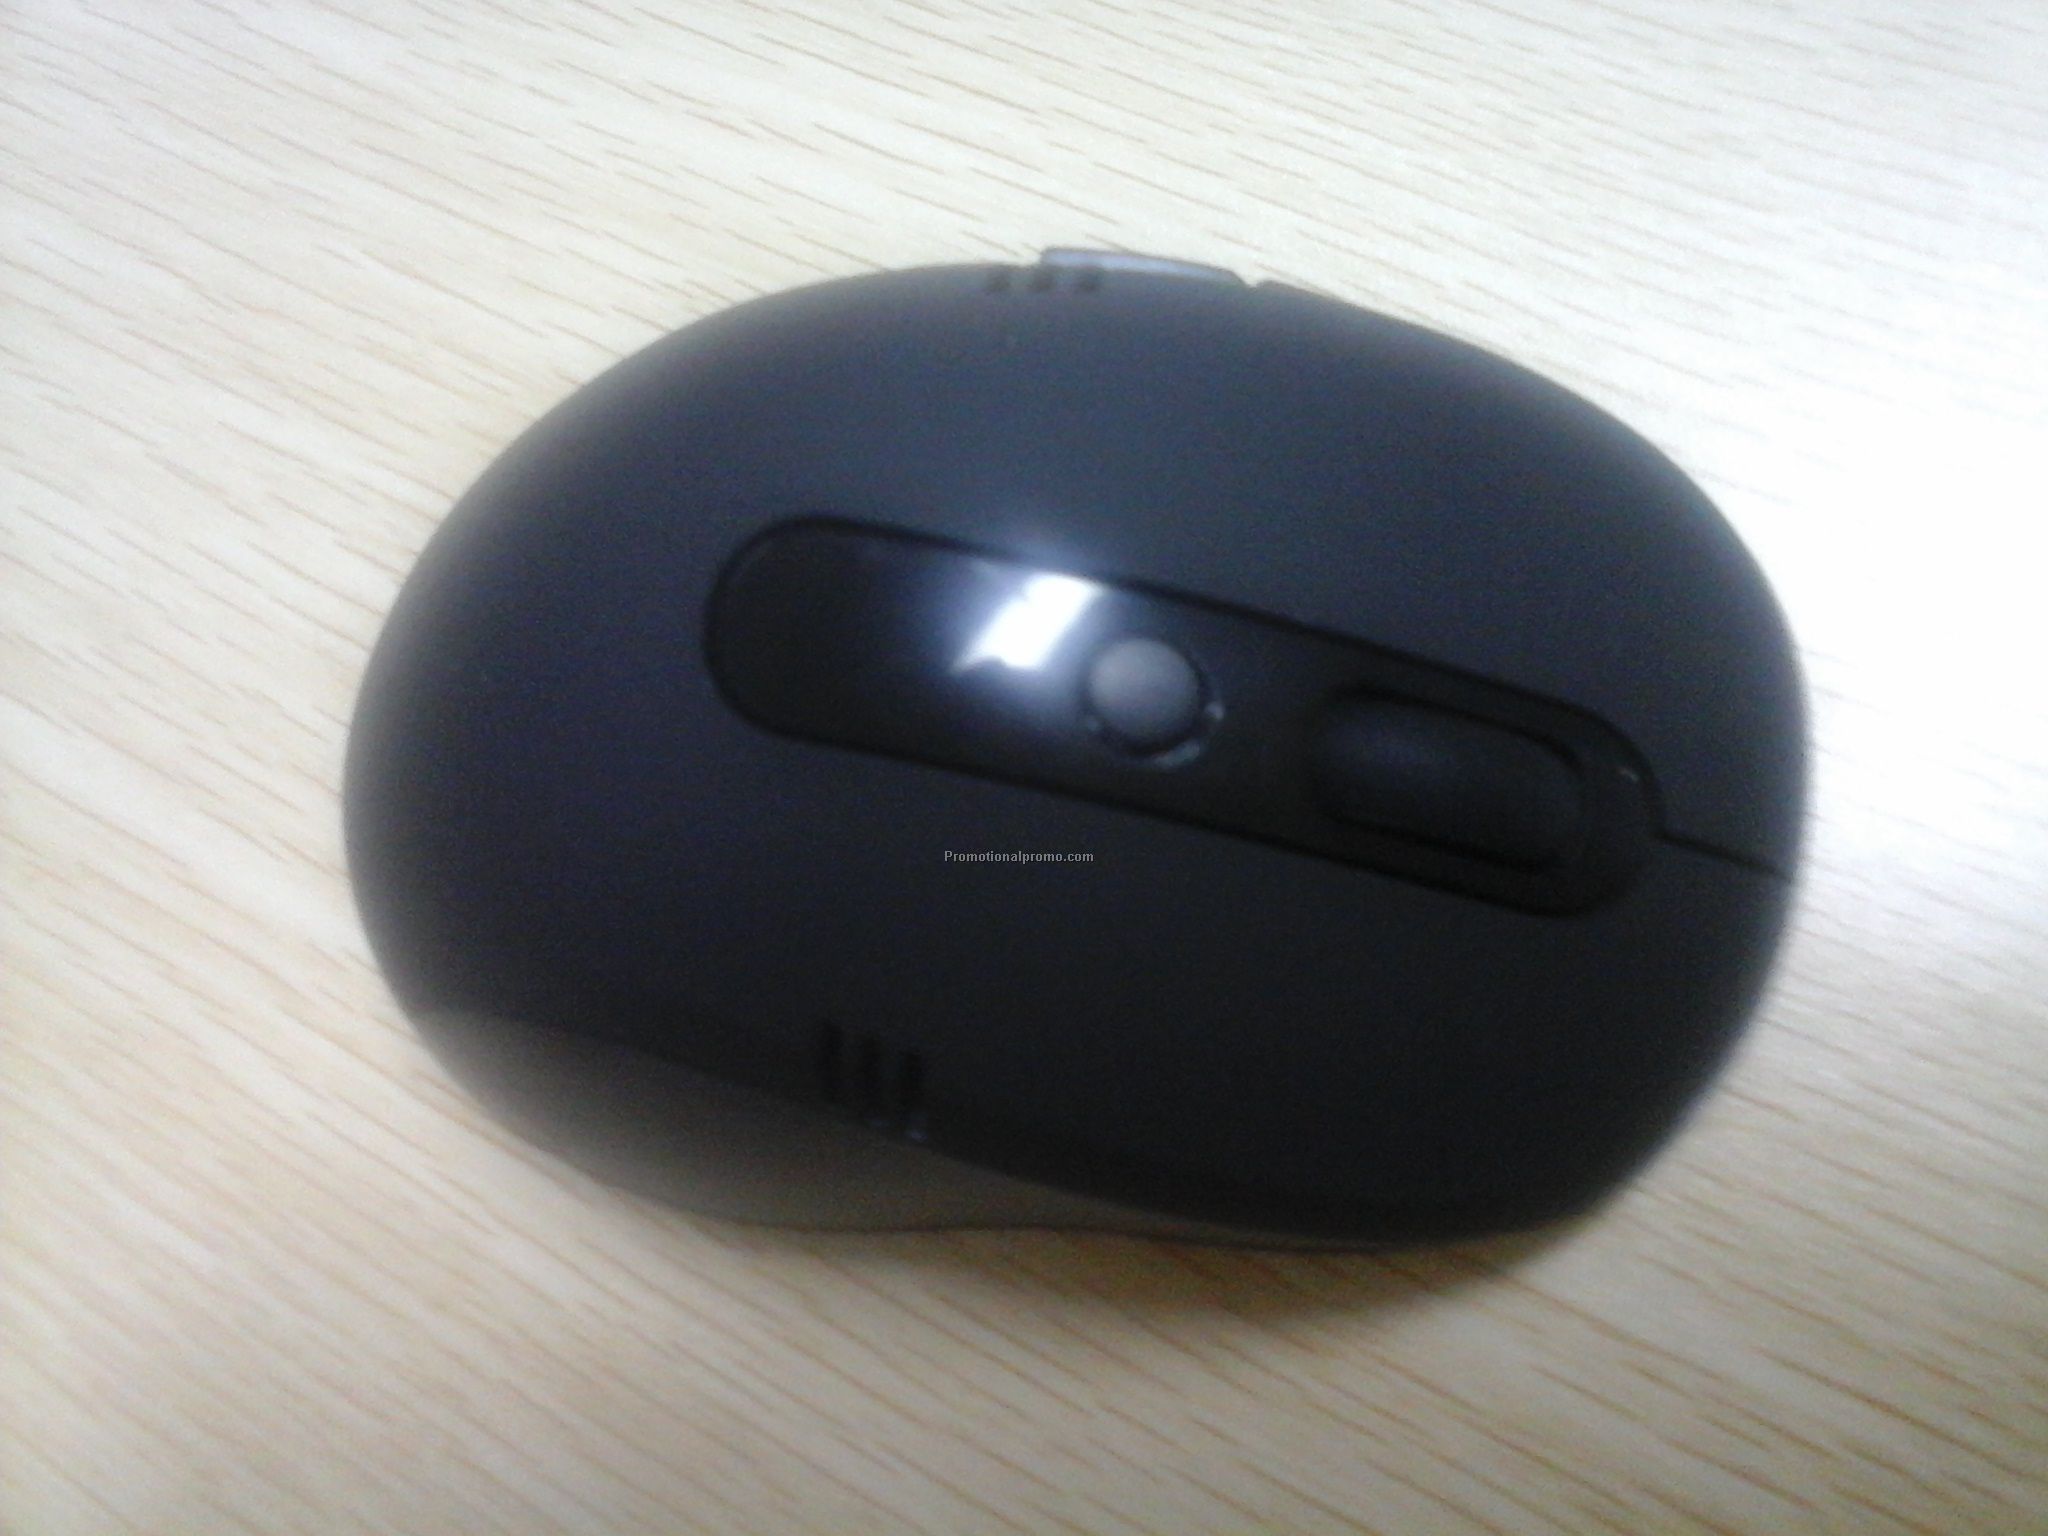 Hot sale 2.4g wireless optical mouse driver, sample is available, matt surface optical mouse Photo 3